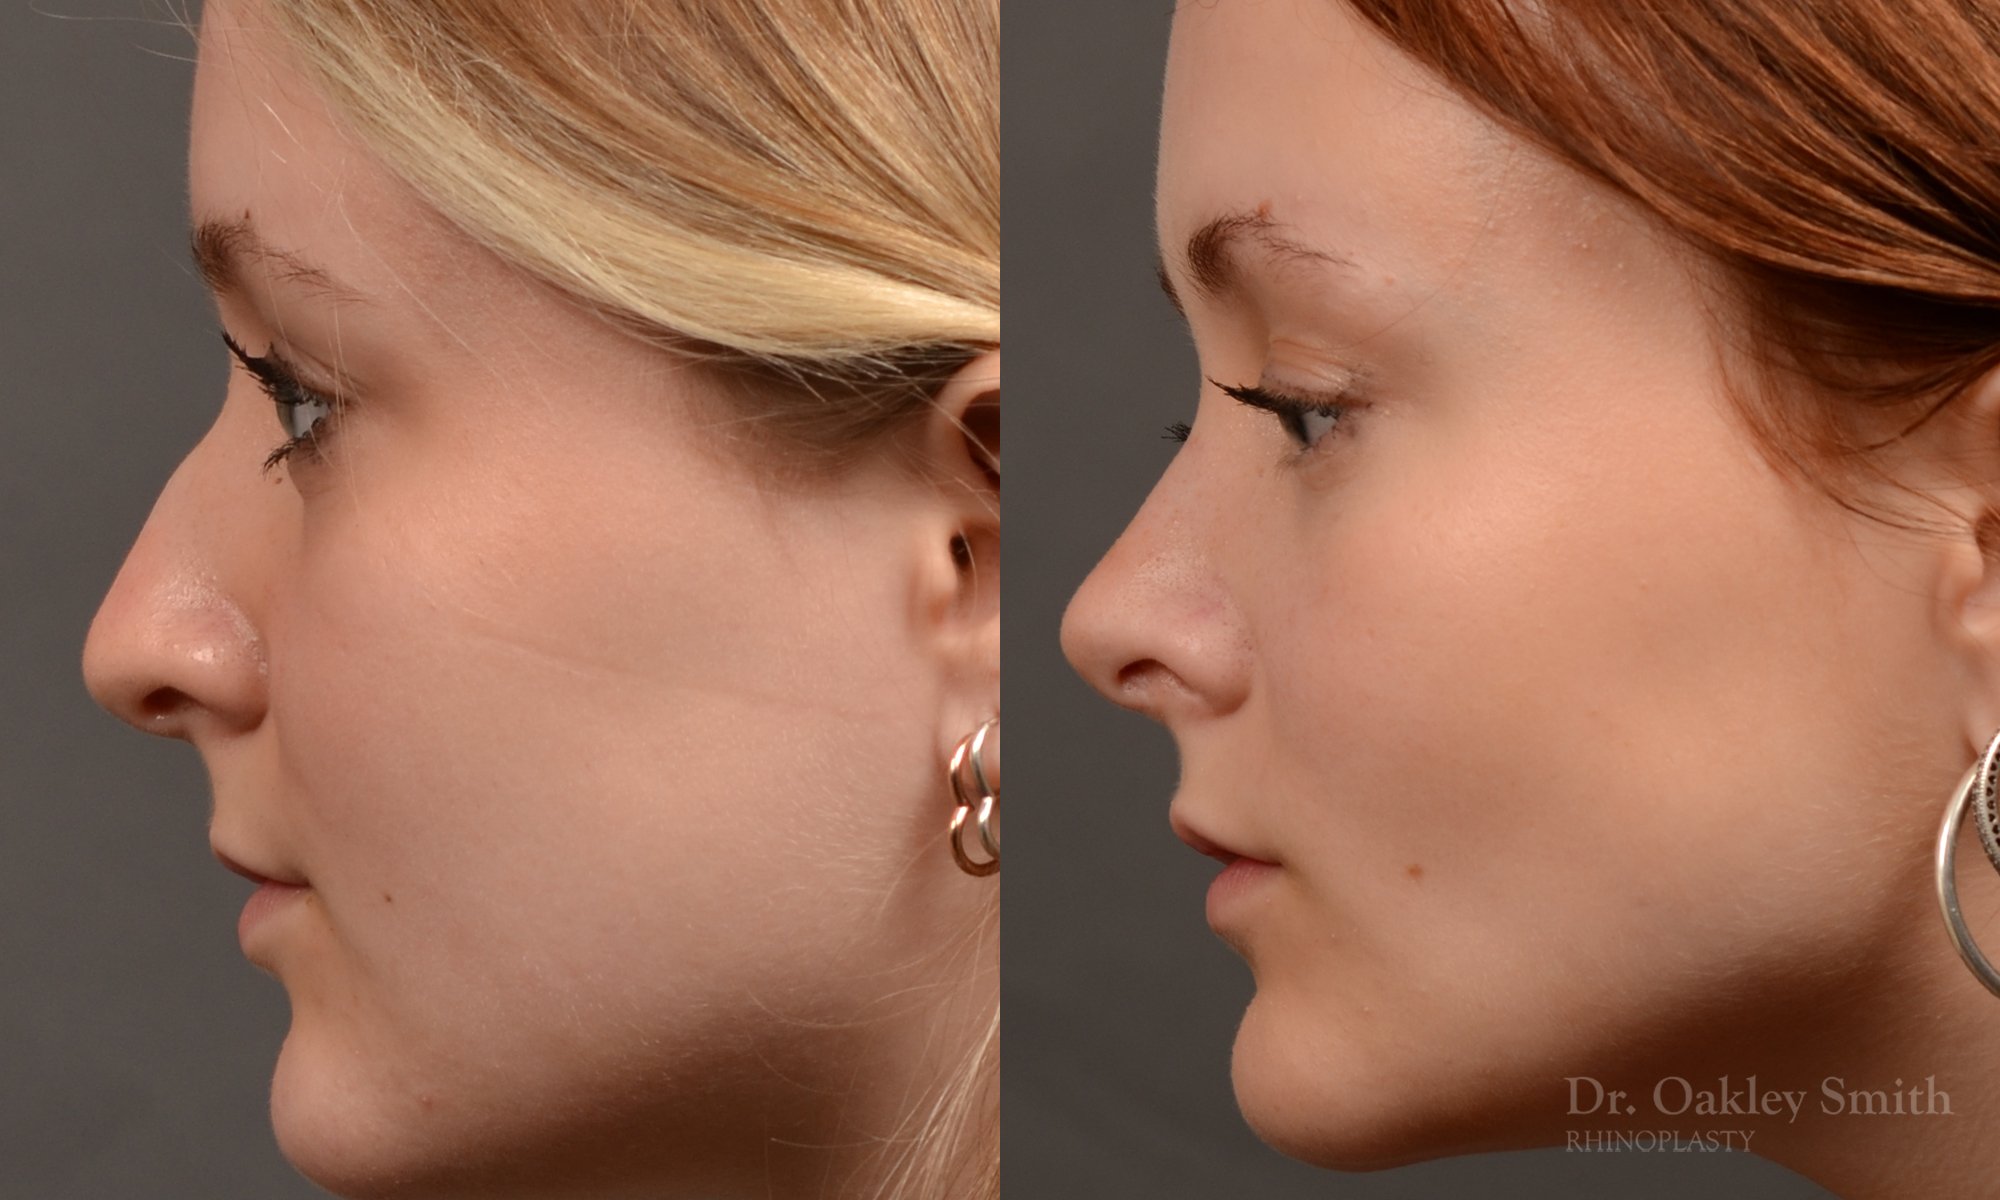 Rhinoplasty - Rhinoplasty Before and After – Case 475